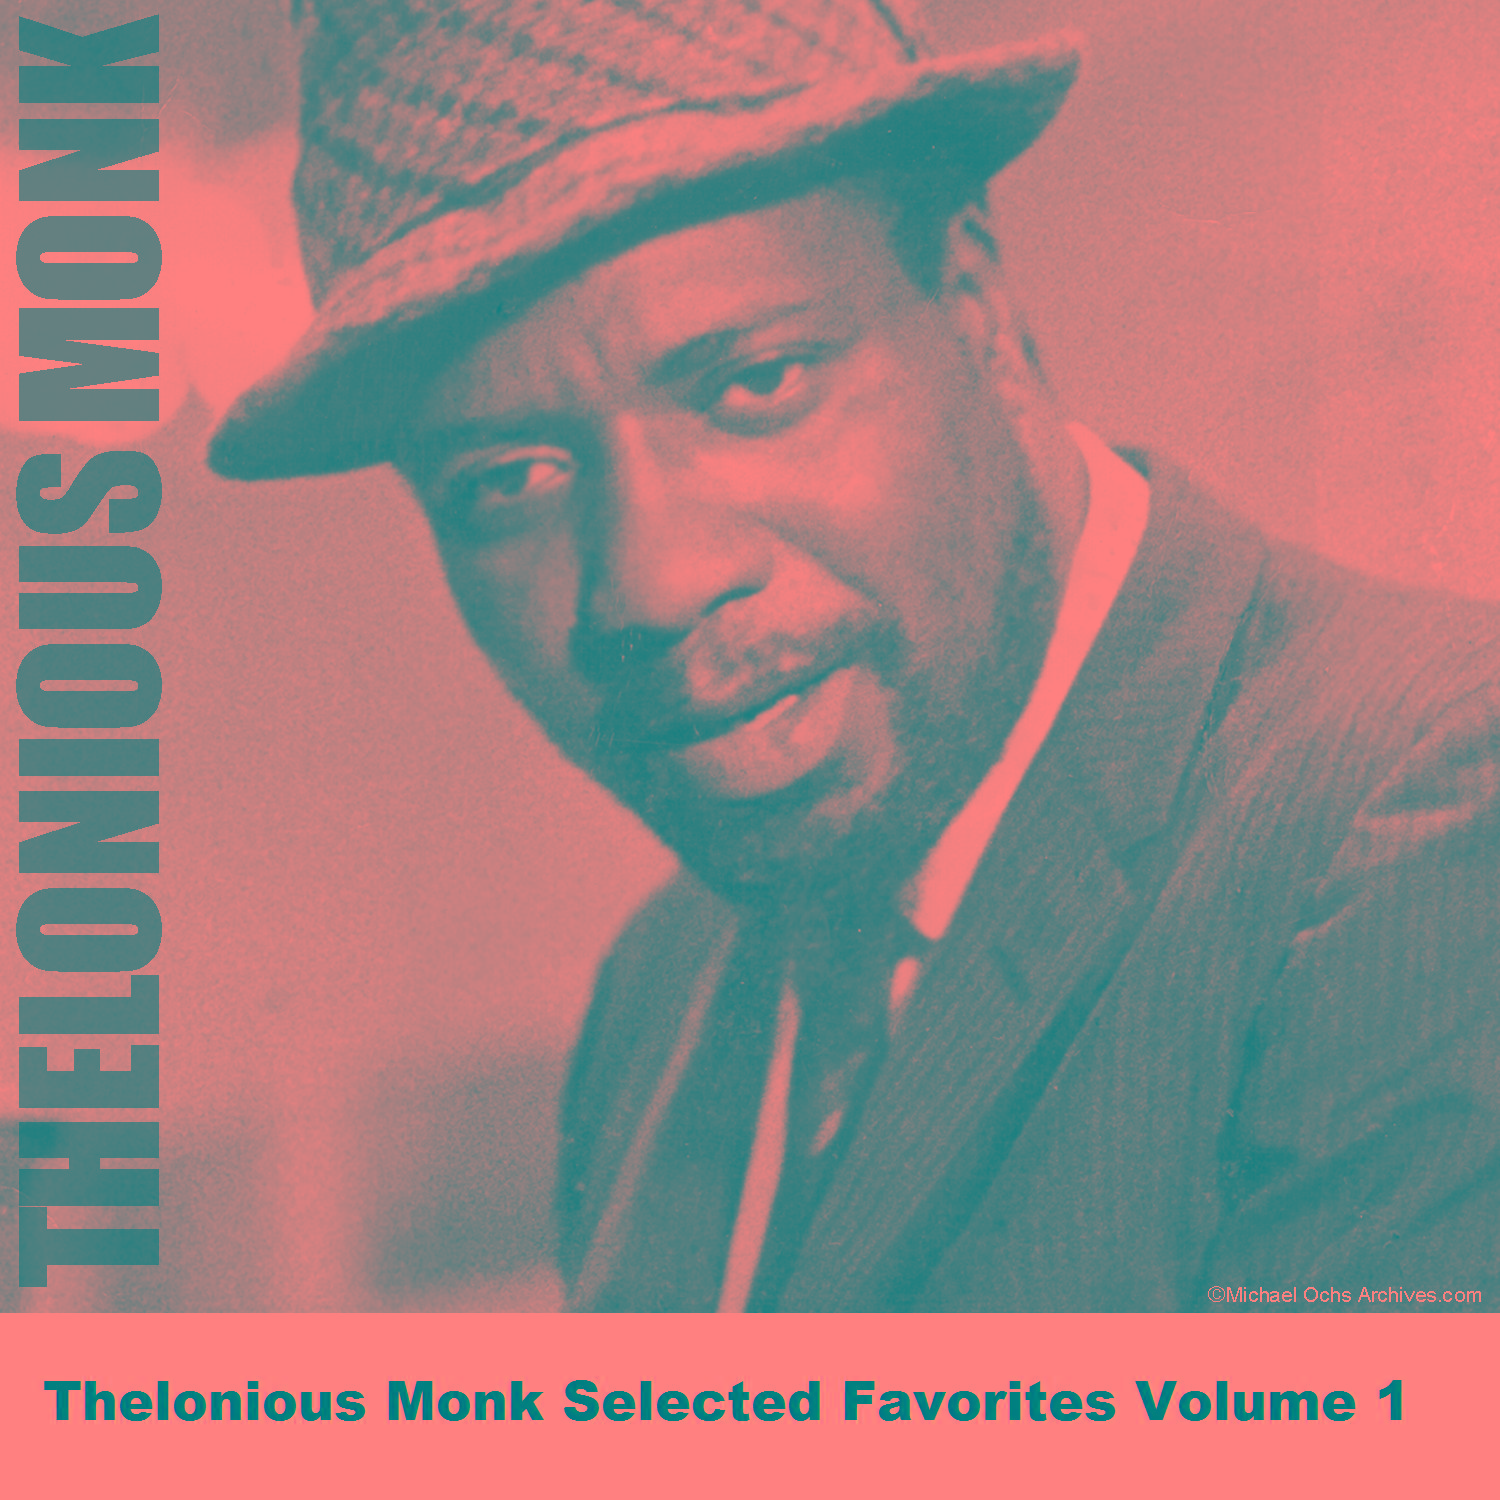 Thelonious Monk Selected Favorites Volume 1